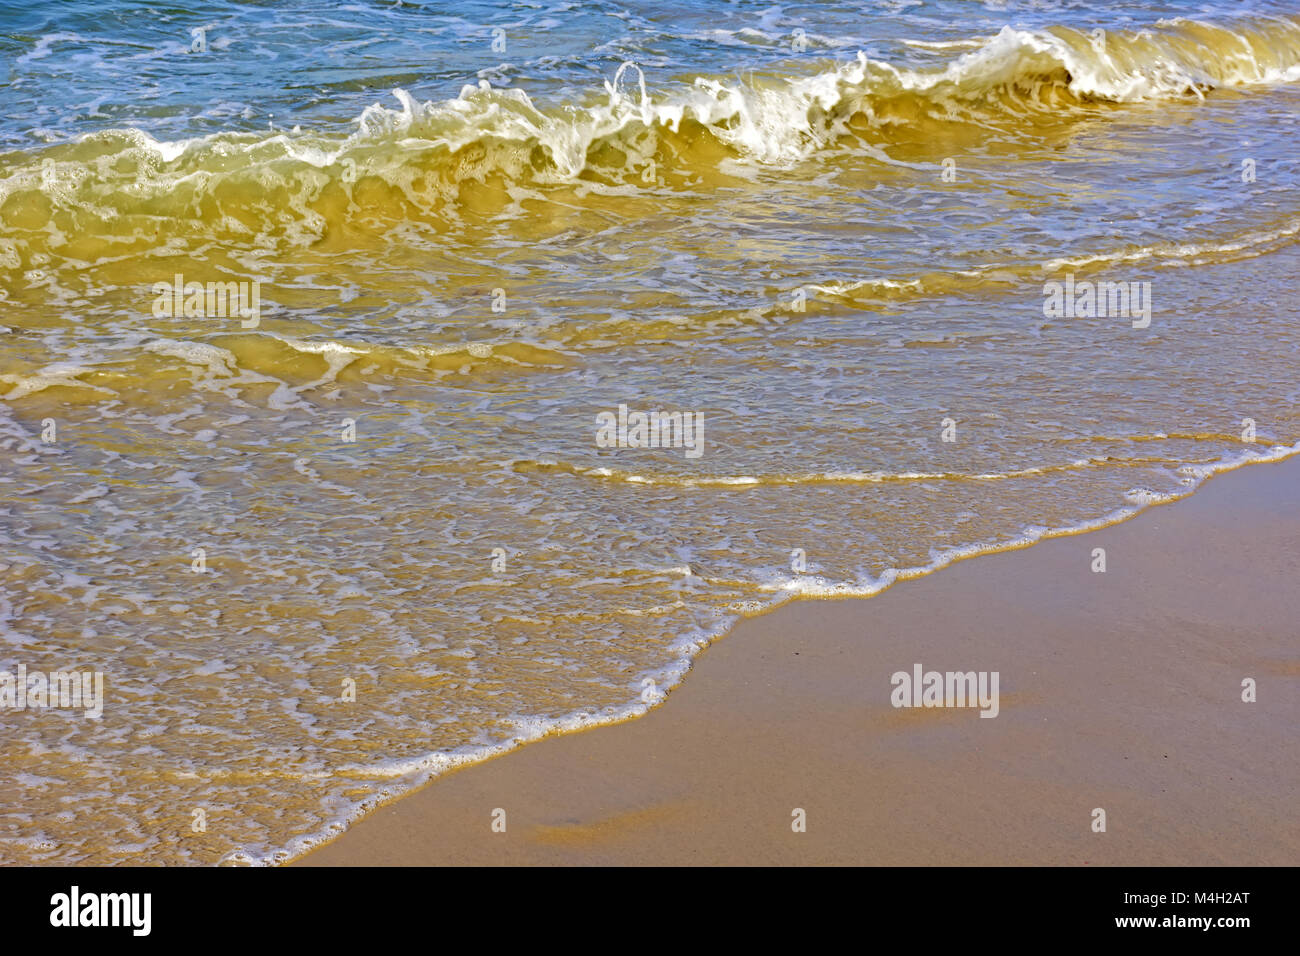 Seawater and sand Stock Photo